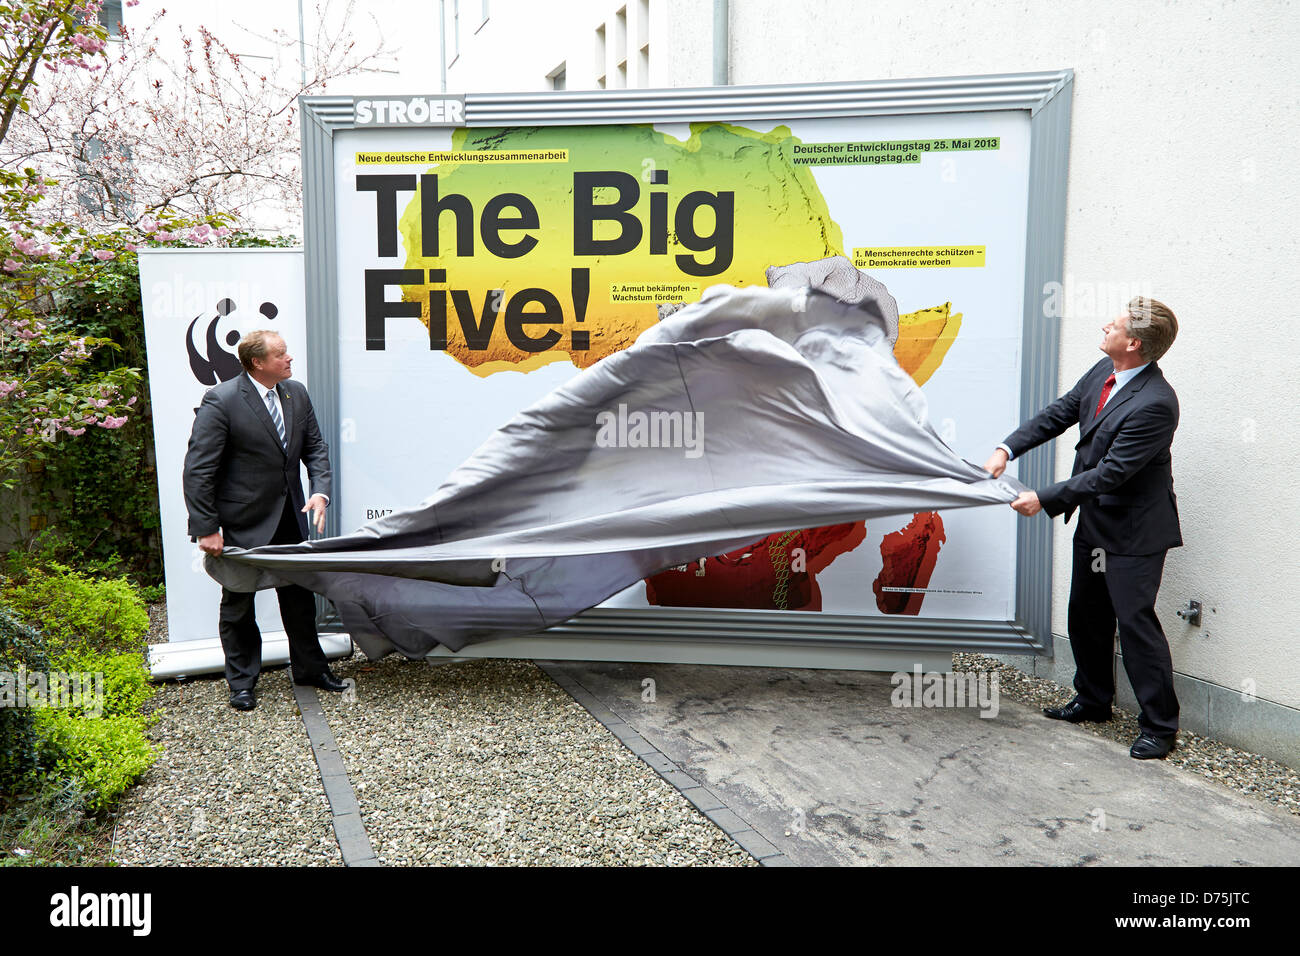 Berlin, 29 April 2013. Start of the national campaign 'The Big Five' with Dirk Niebel. Dirk Niebel, Federal Minister for Economic Cooperation and Development and Eberhard Brandes, CEO of WWF Germany, present the new nationwide poster campaign 'The Big Five' of the Federal Ministry for Economic Cooperation and Development. / Development Minister Dirk Niebel and Eberhard Brandes, CEO of WWF Germany,  started  the national campaign 'The Big Five'. Credit:Reynaldo Chaib Paganelli/Alamy Live News Stock Photo